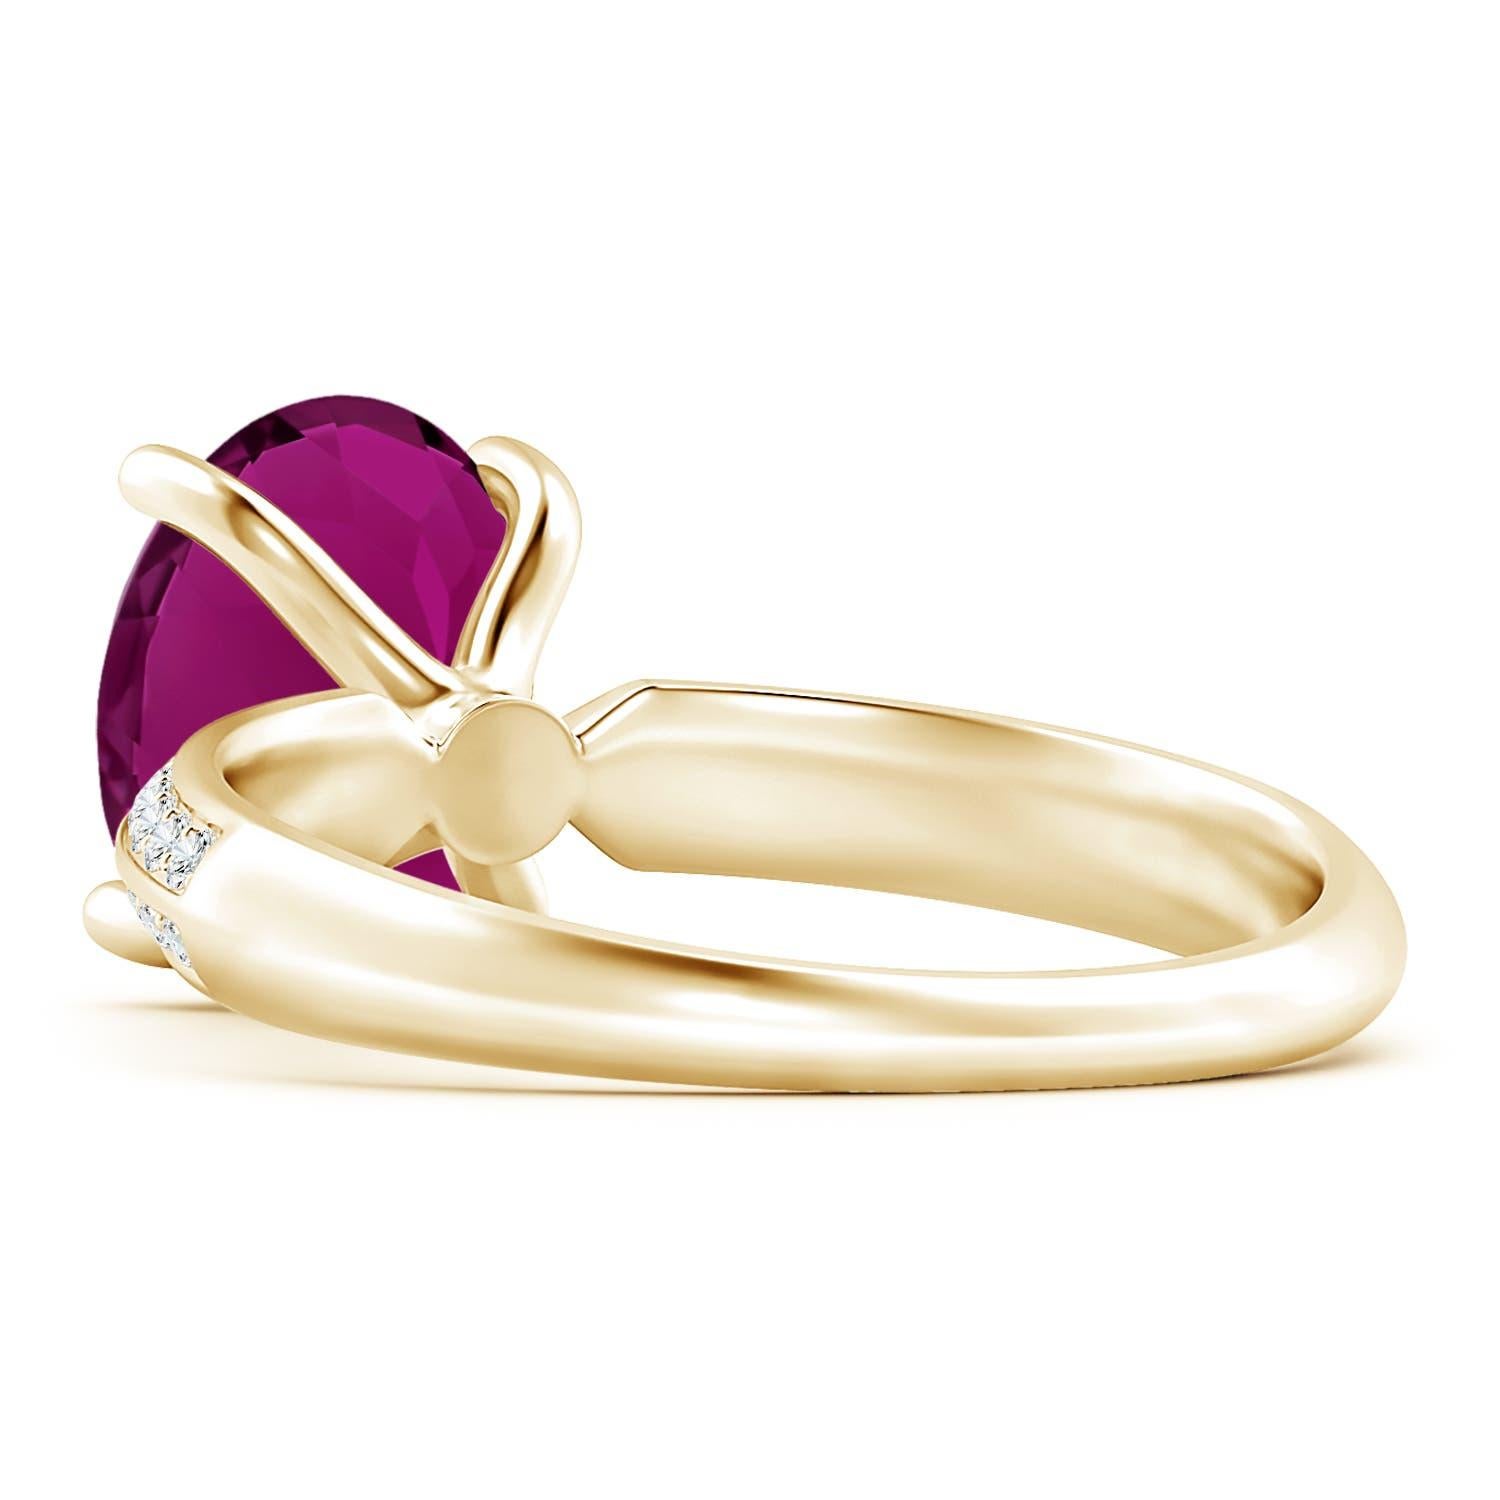 For Sale:  Angara Gia Certified Natural Classic Pink Sapphire Ring in Yellow Gold 5